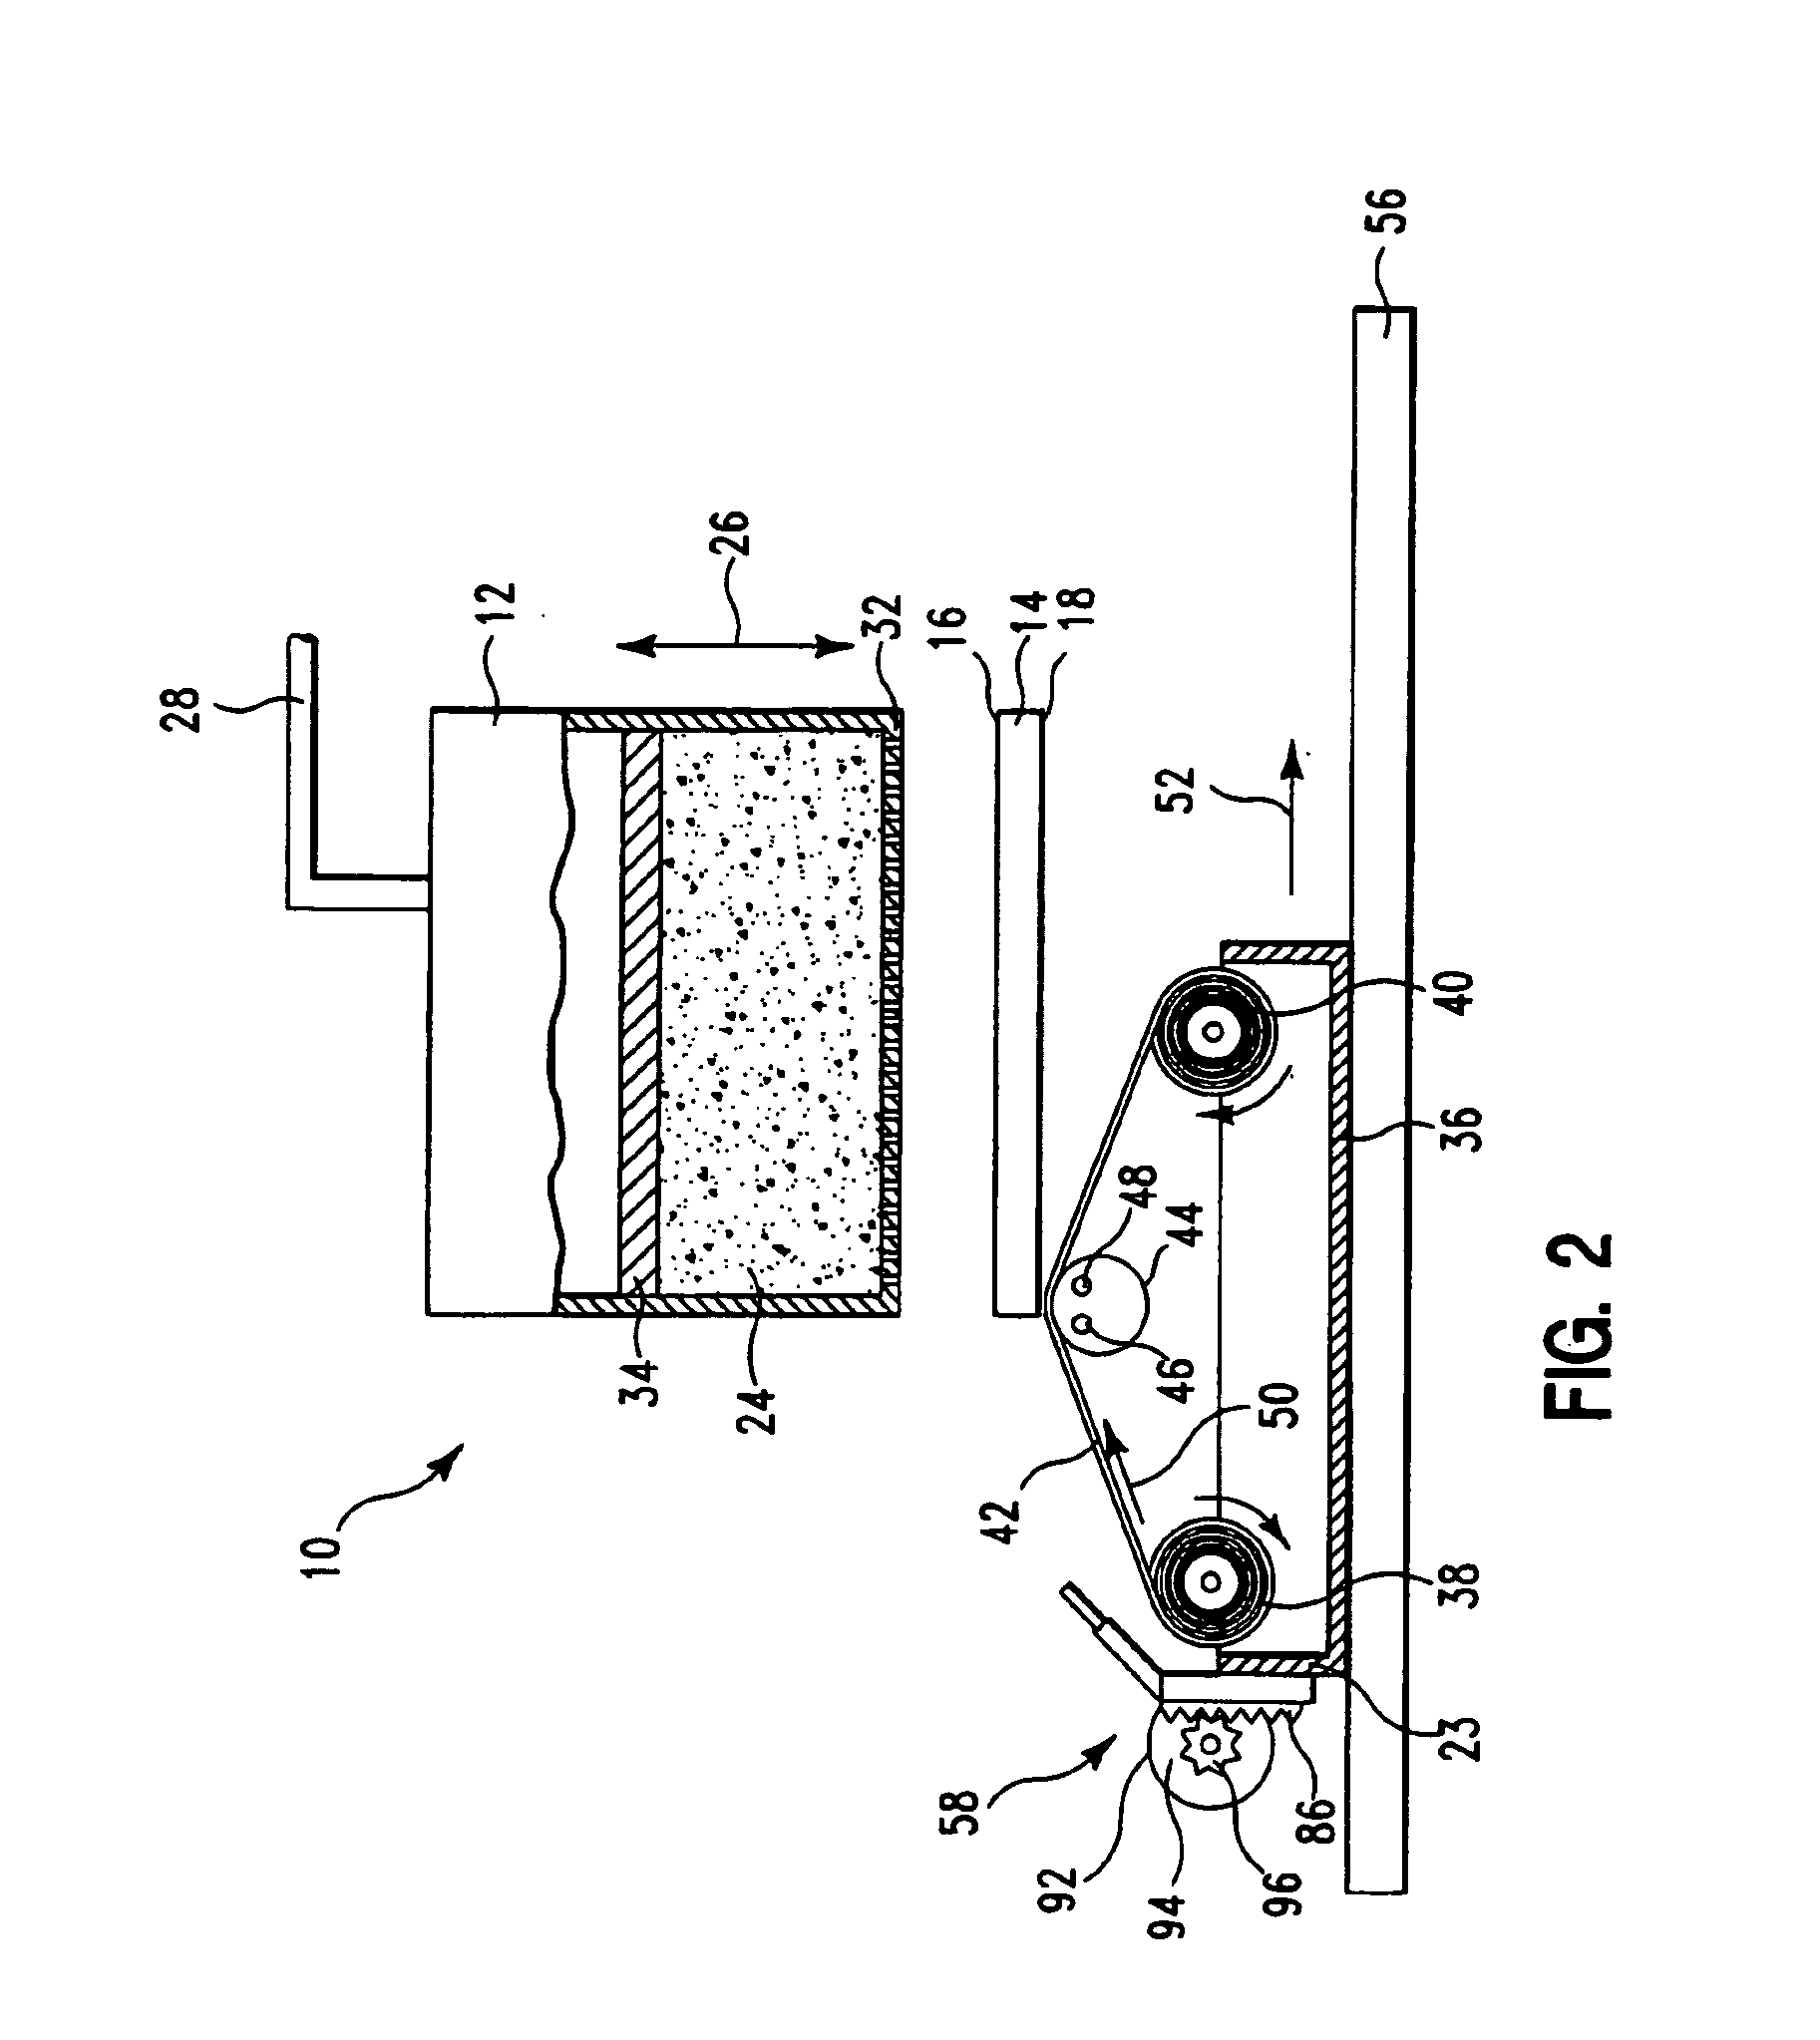 Apparatus and method for cleaning stencils employed in a screen printing apparatus